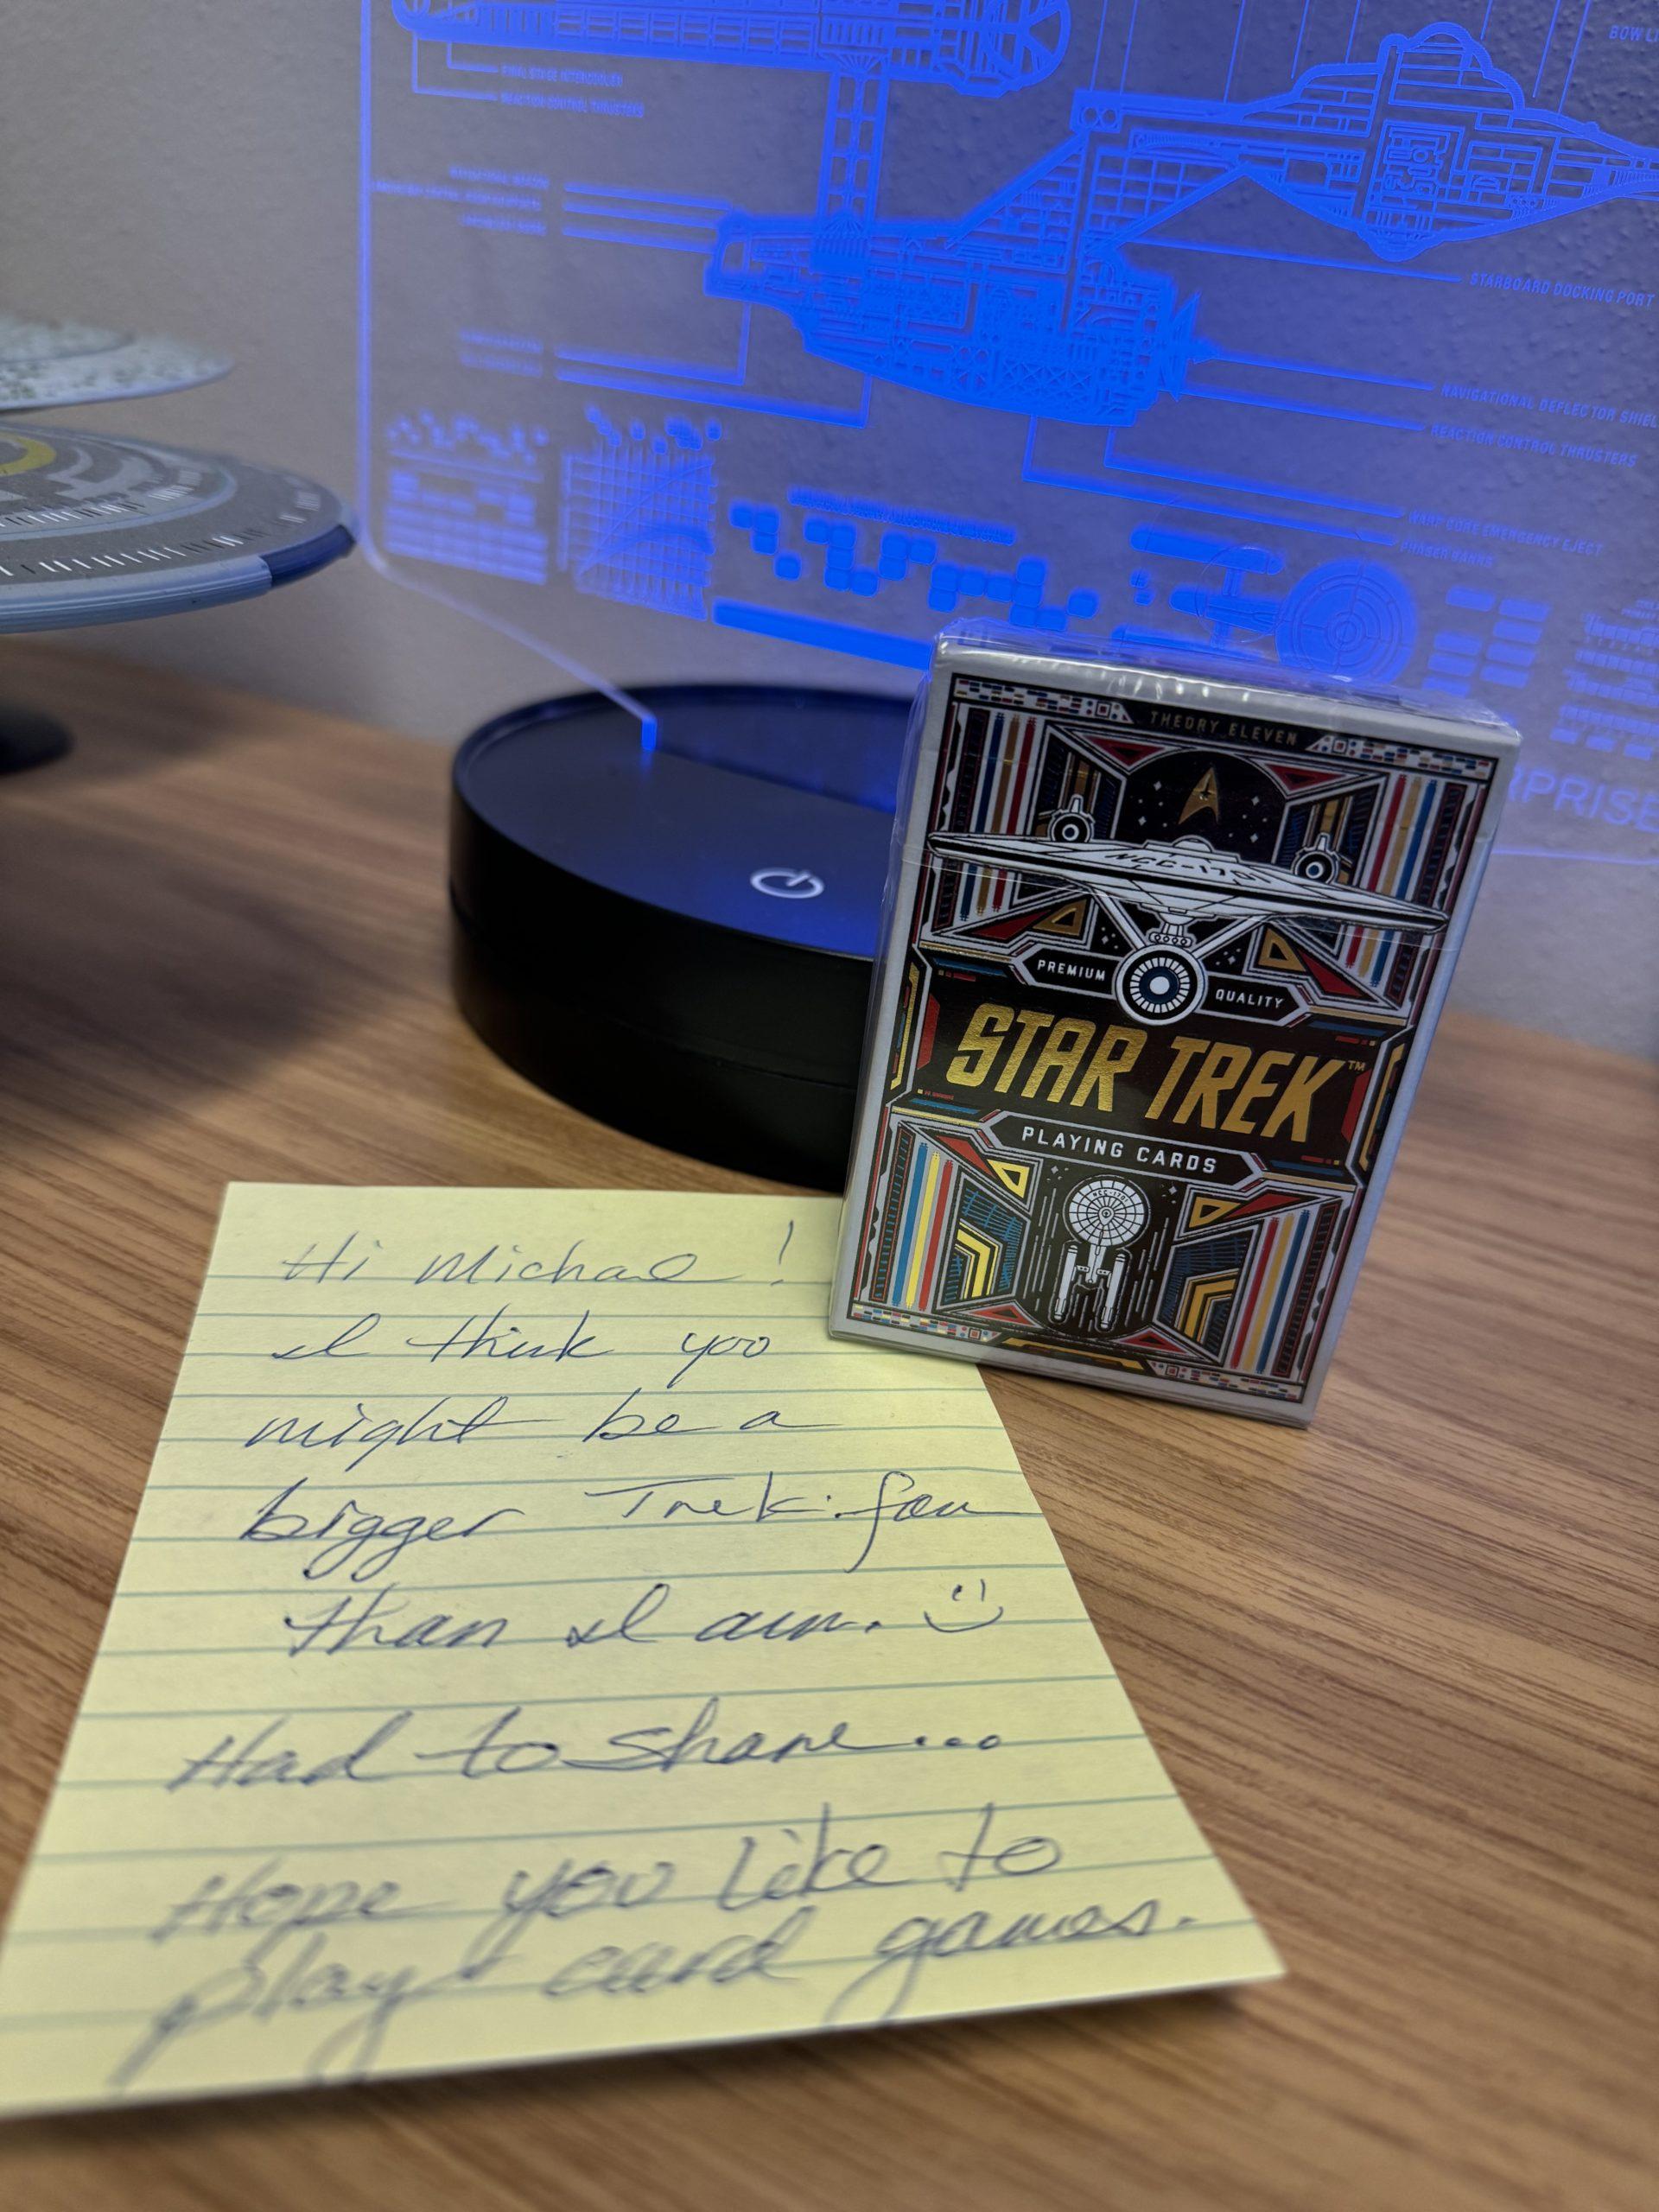 A Star Trek themed deck of playing cards, with a friendly note from the sender.